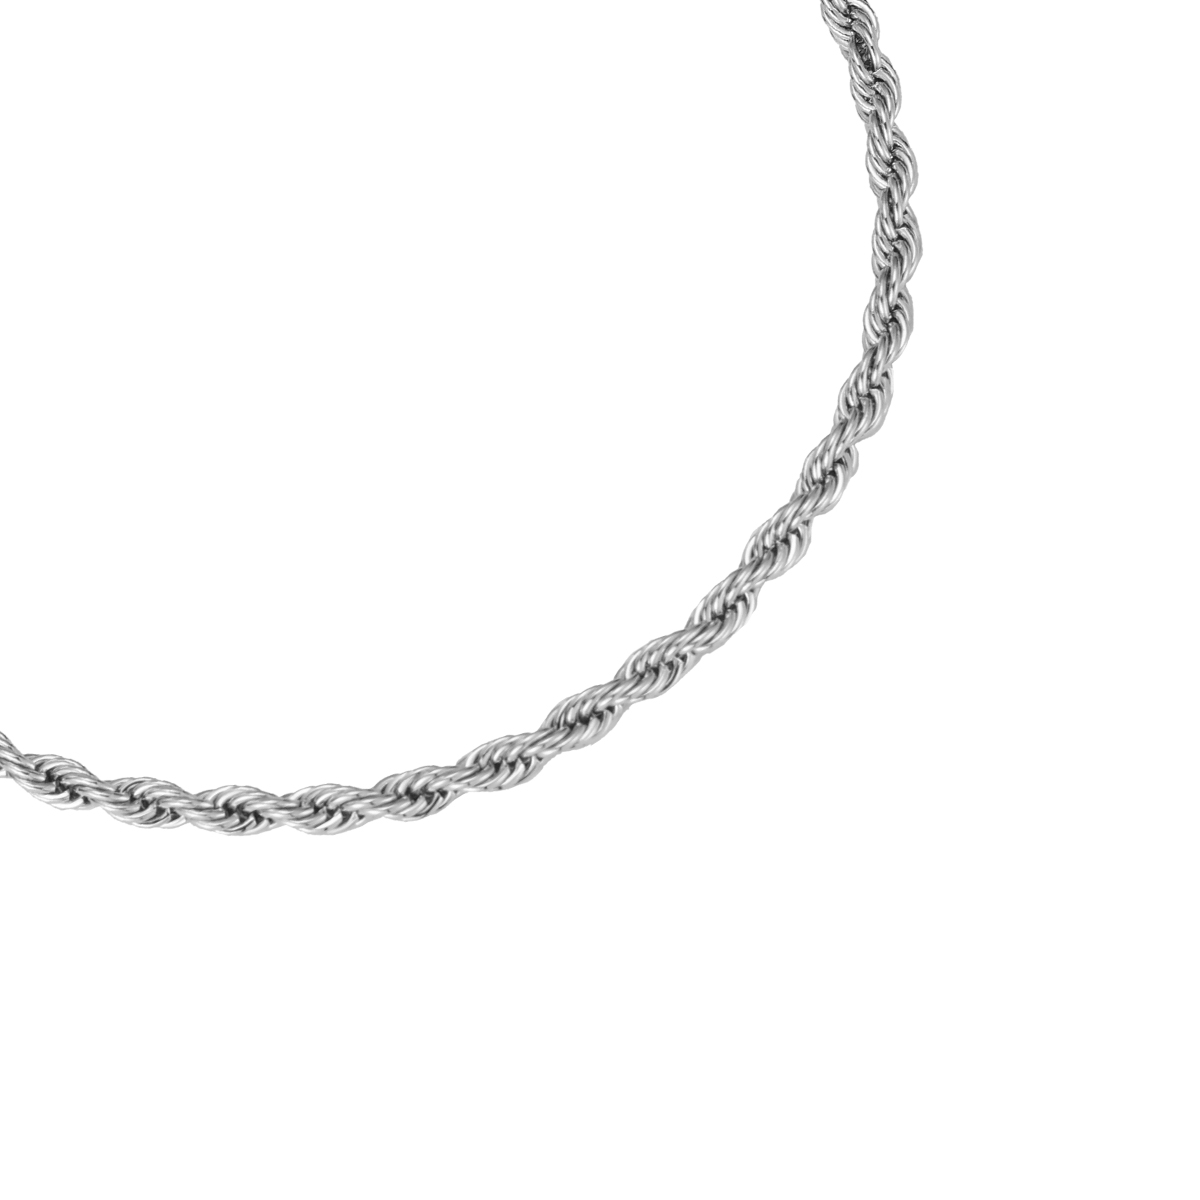 Simple Round Chain Stainless Steel Bracelet 